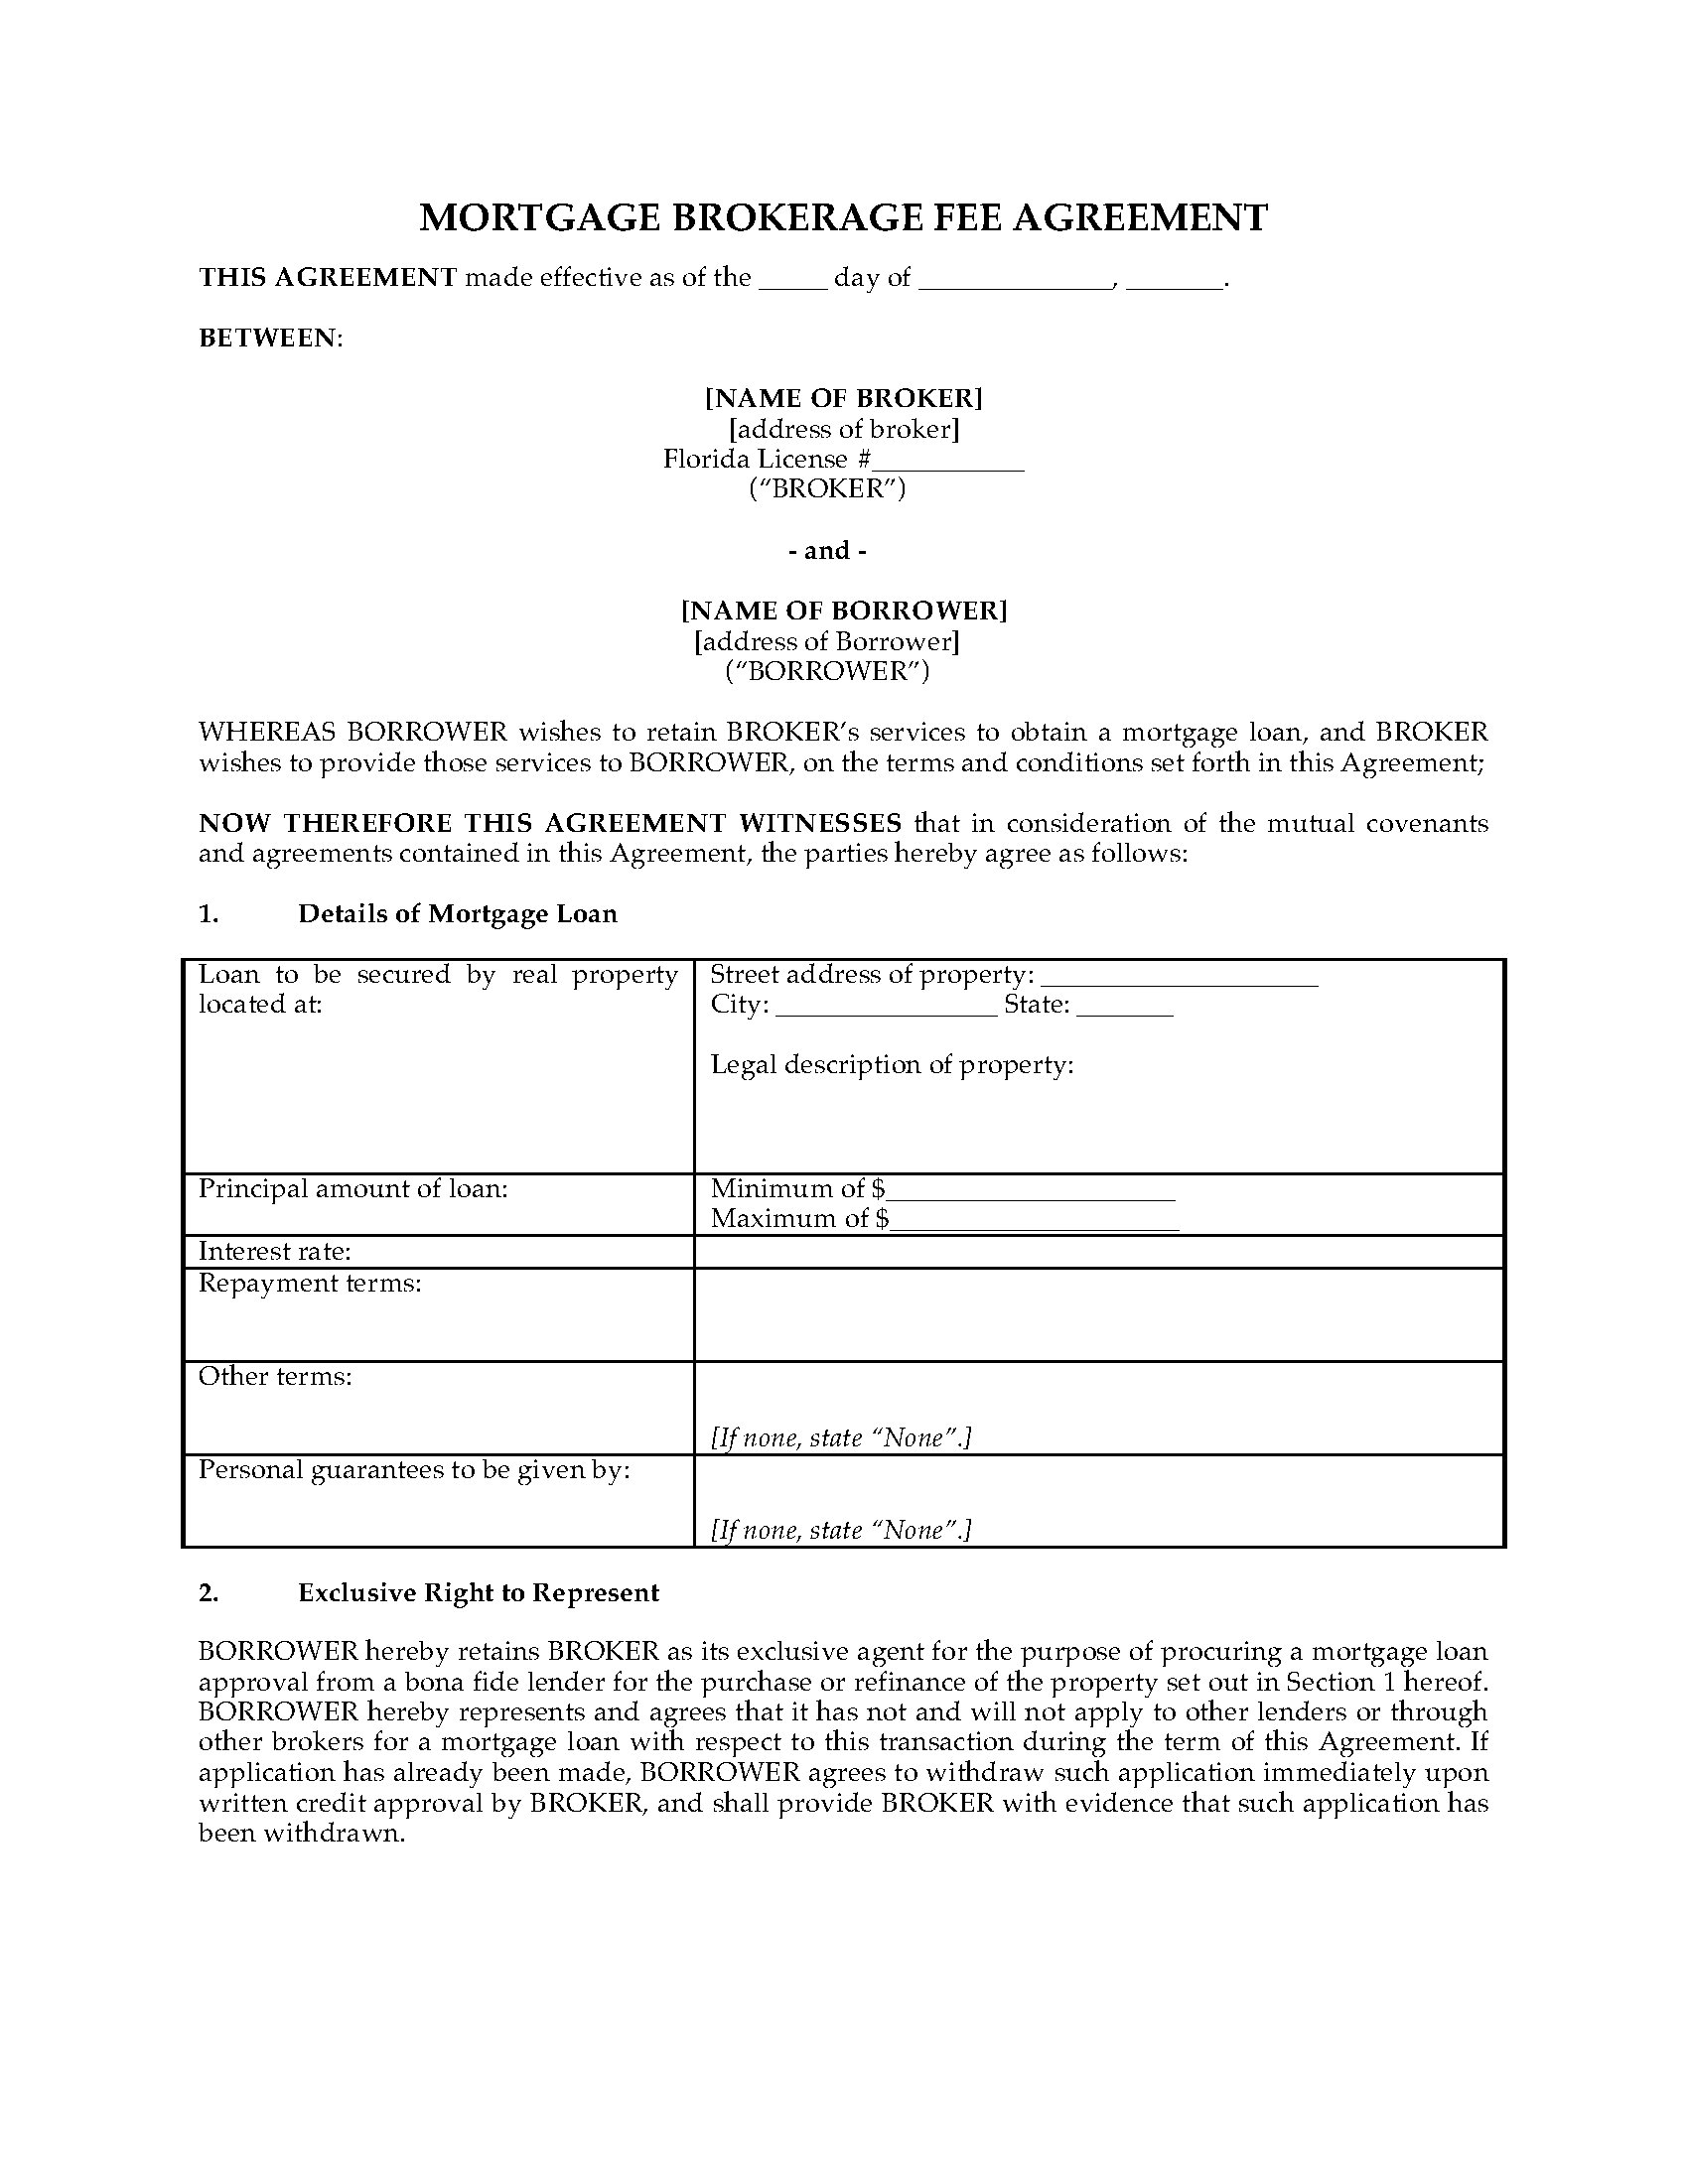 Florida Mortgage Brokerage Fee Agreement  Legal Forms and Throughout commercial mortgage broker fee agreement template